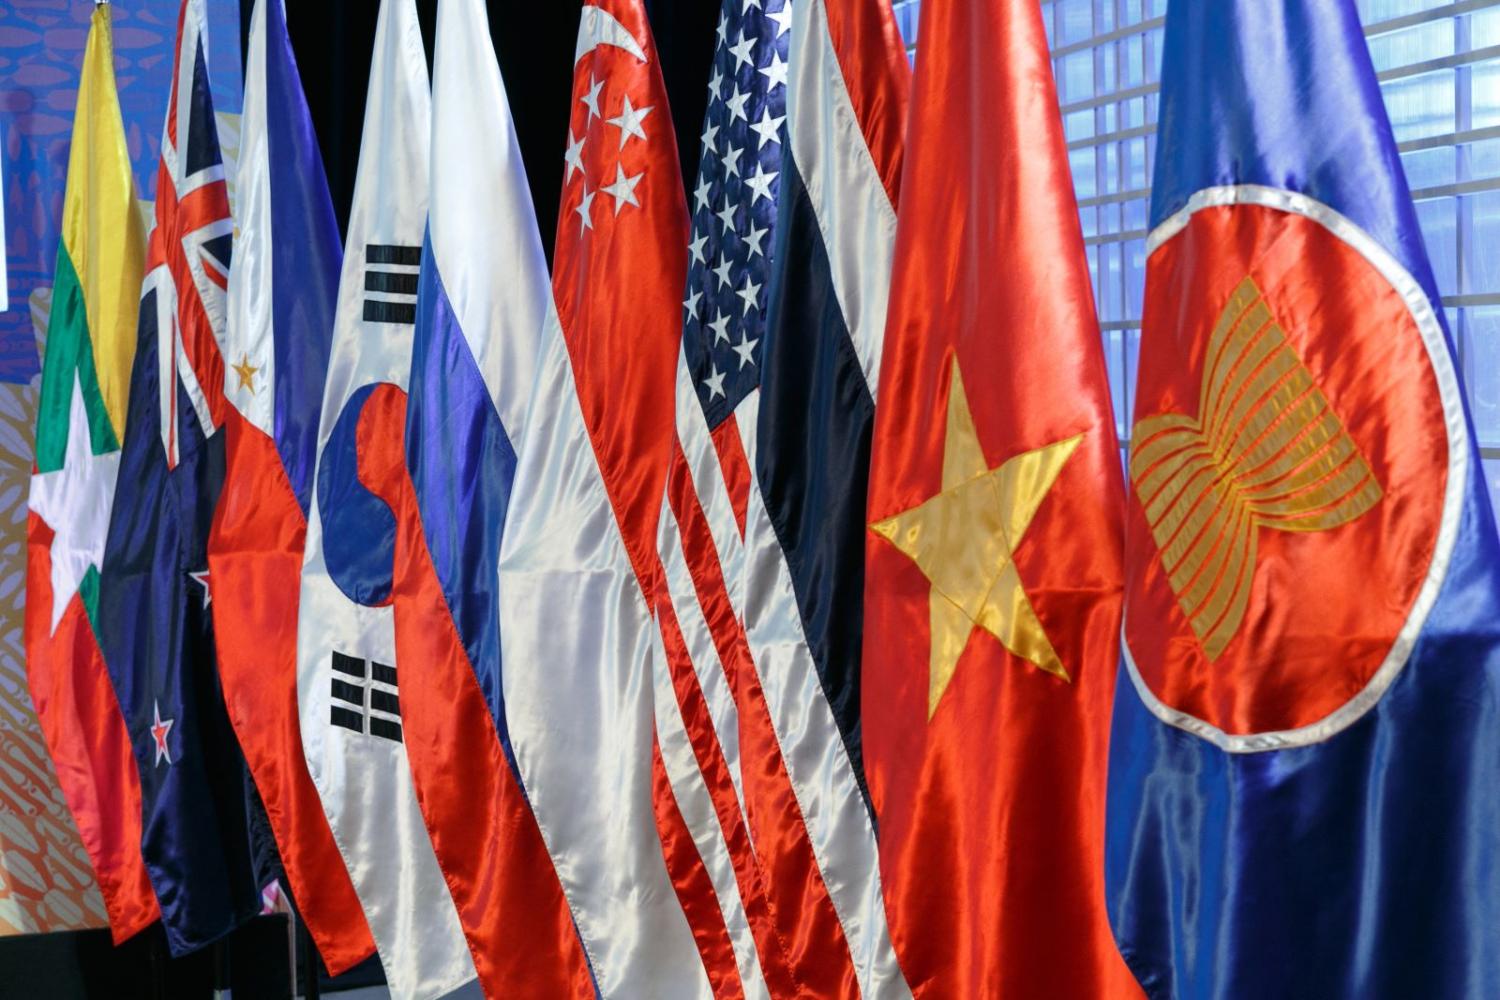 ASEAN flags at a meeting of ASEAN officials in Manila, Philippines (Photo: Vadim Savitsky\via Getty)